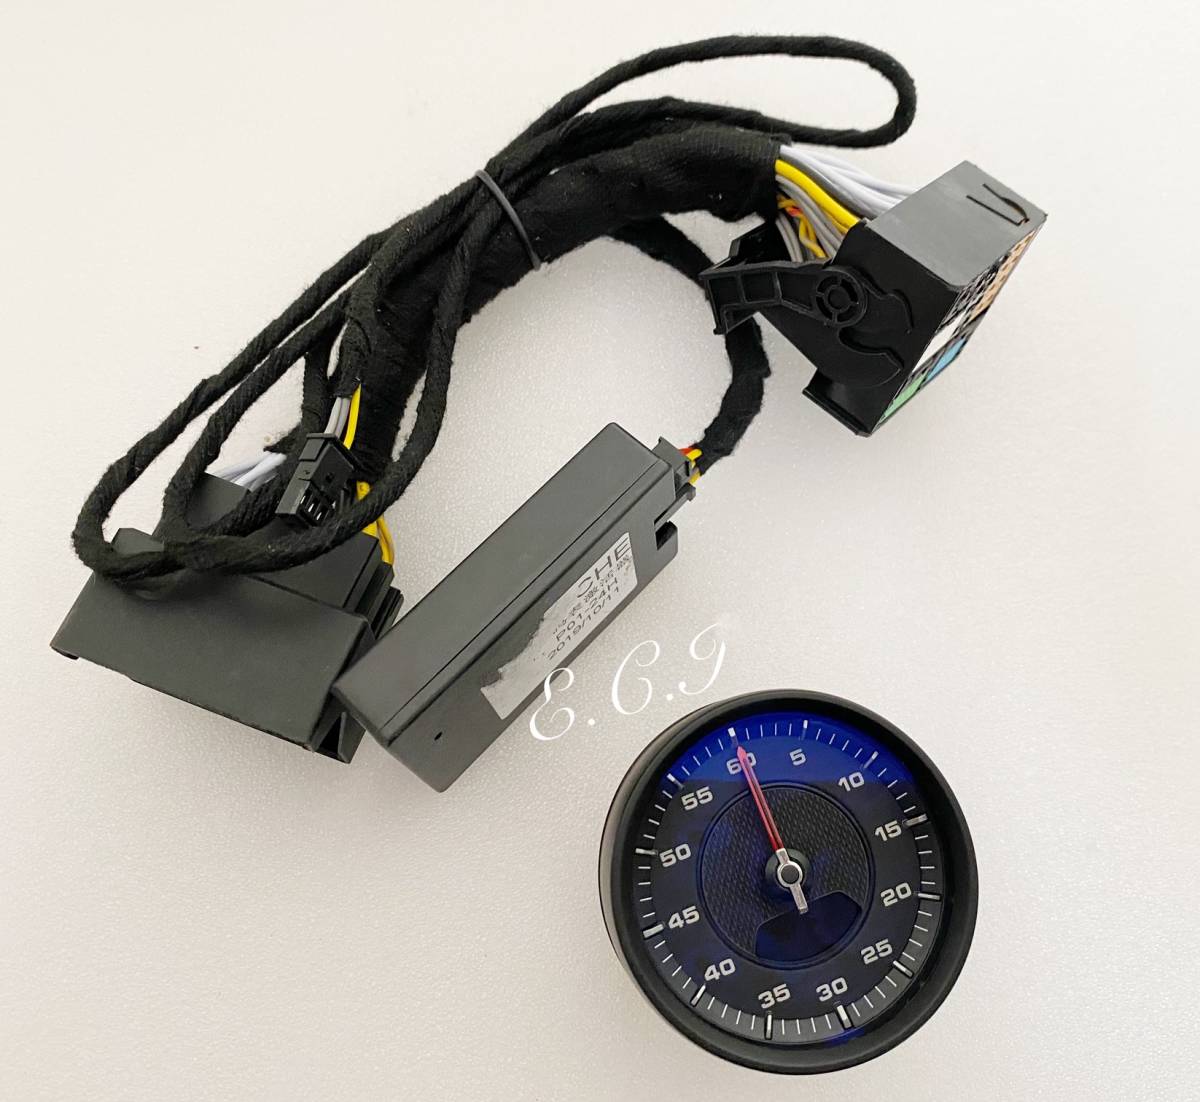  genuine products Porsche 970 958 911 991 971 Panamera Chrono Stop watch clock + cable attaching less vehicle . that way installation possible 